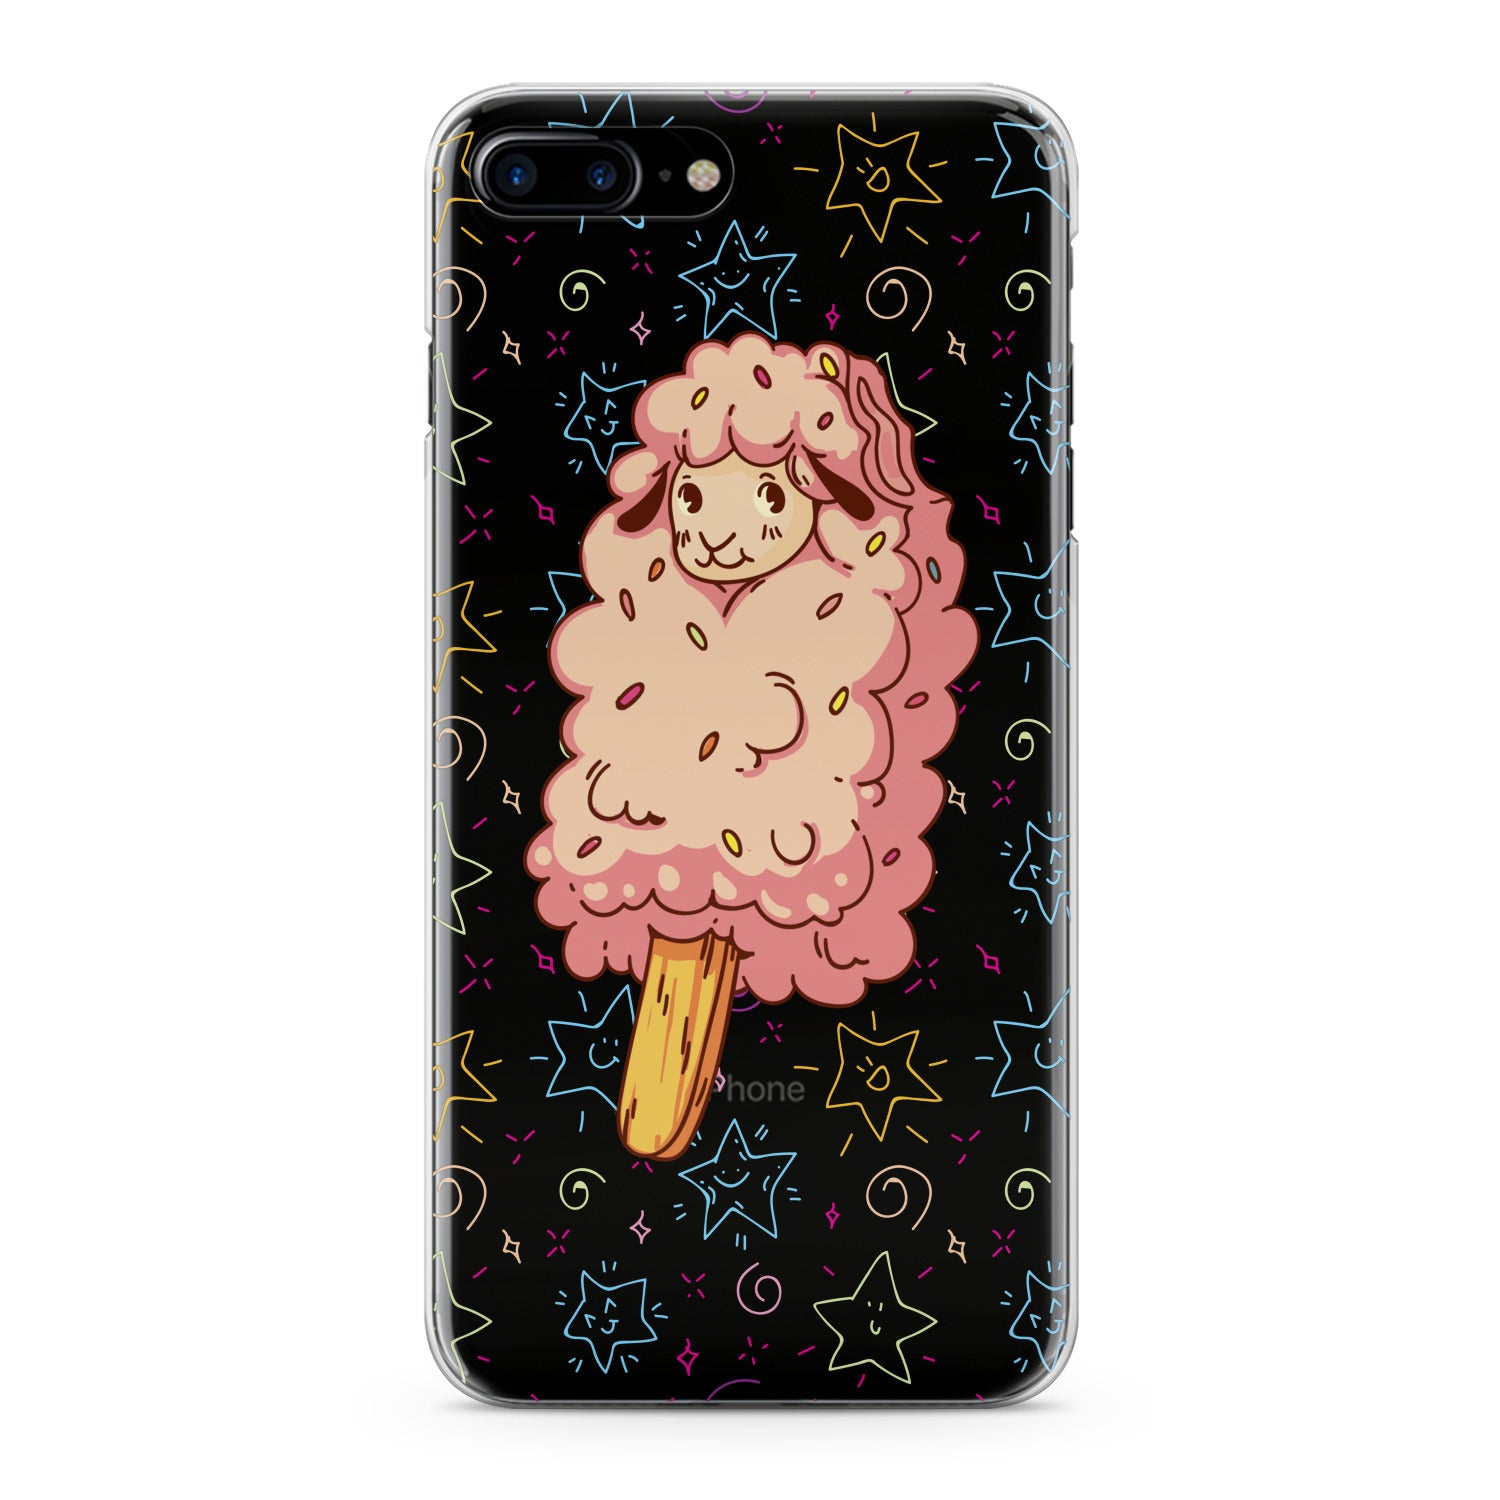 Lex Altern Cute Lamb Ice Cream Phone Case for your iPhone & Android phone.